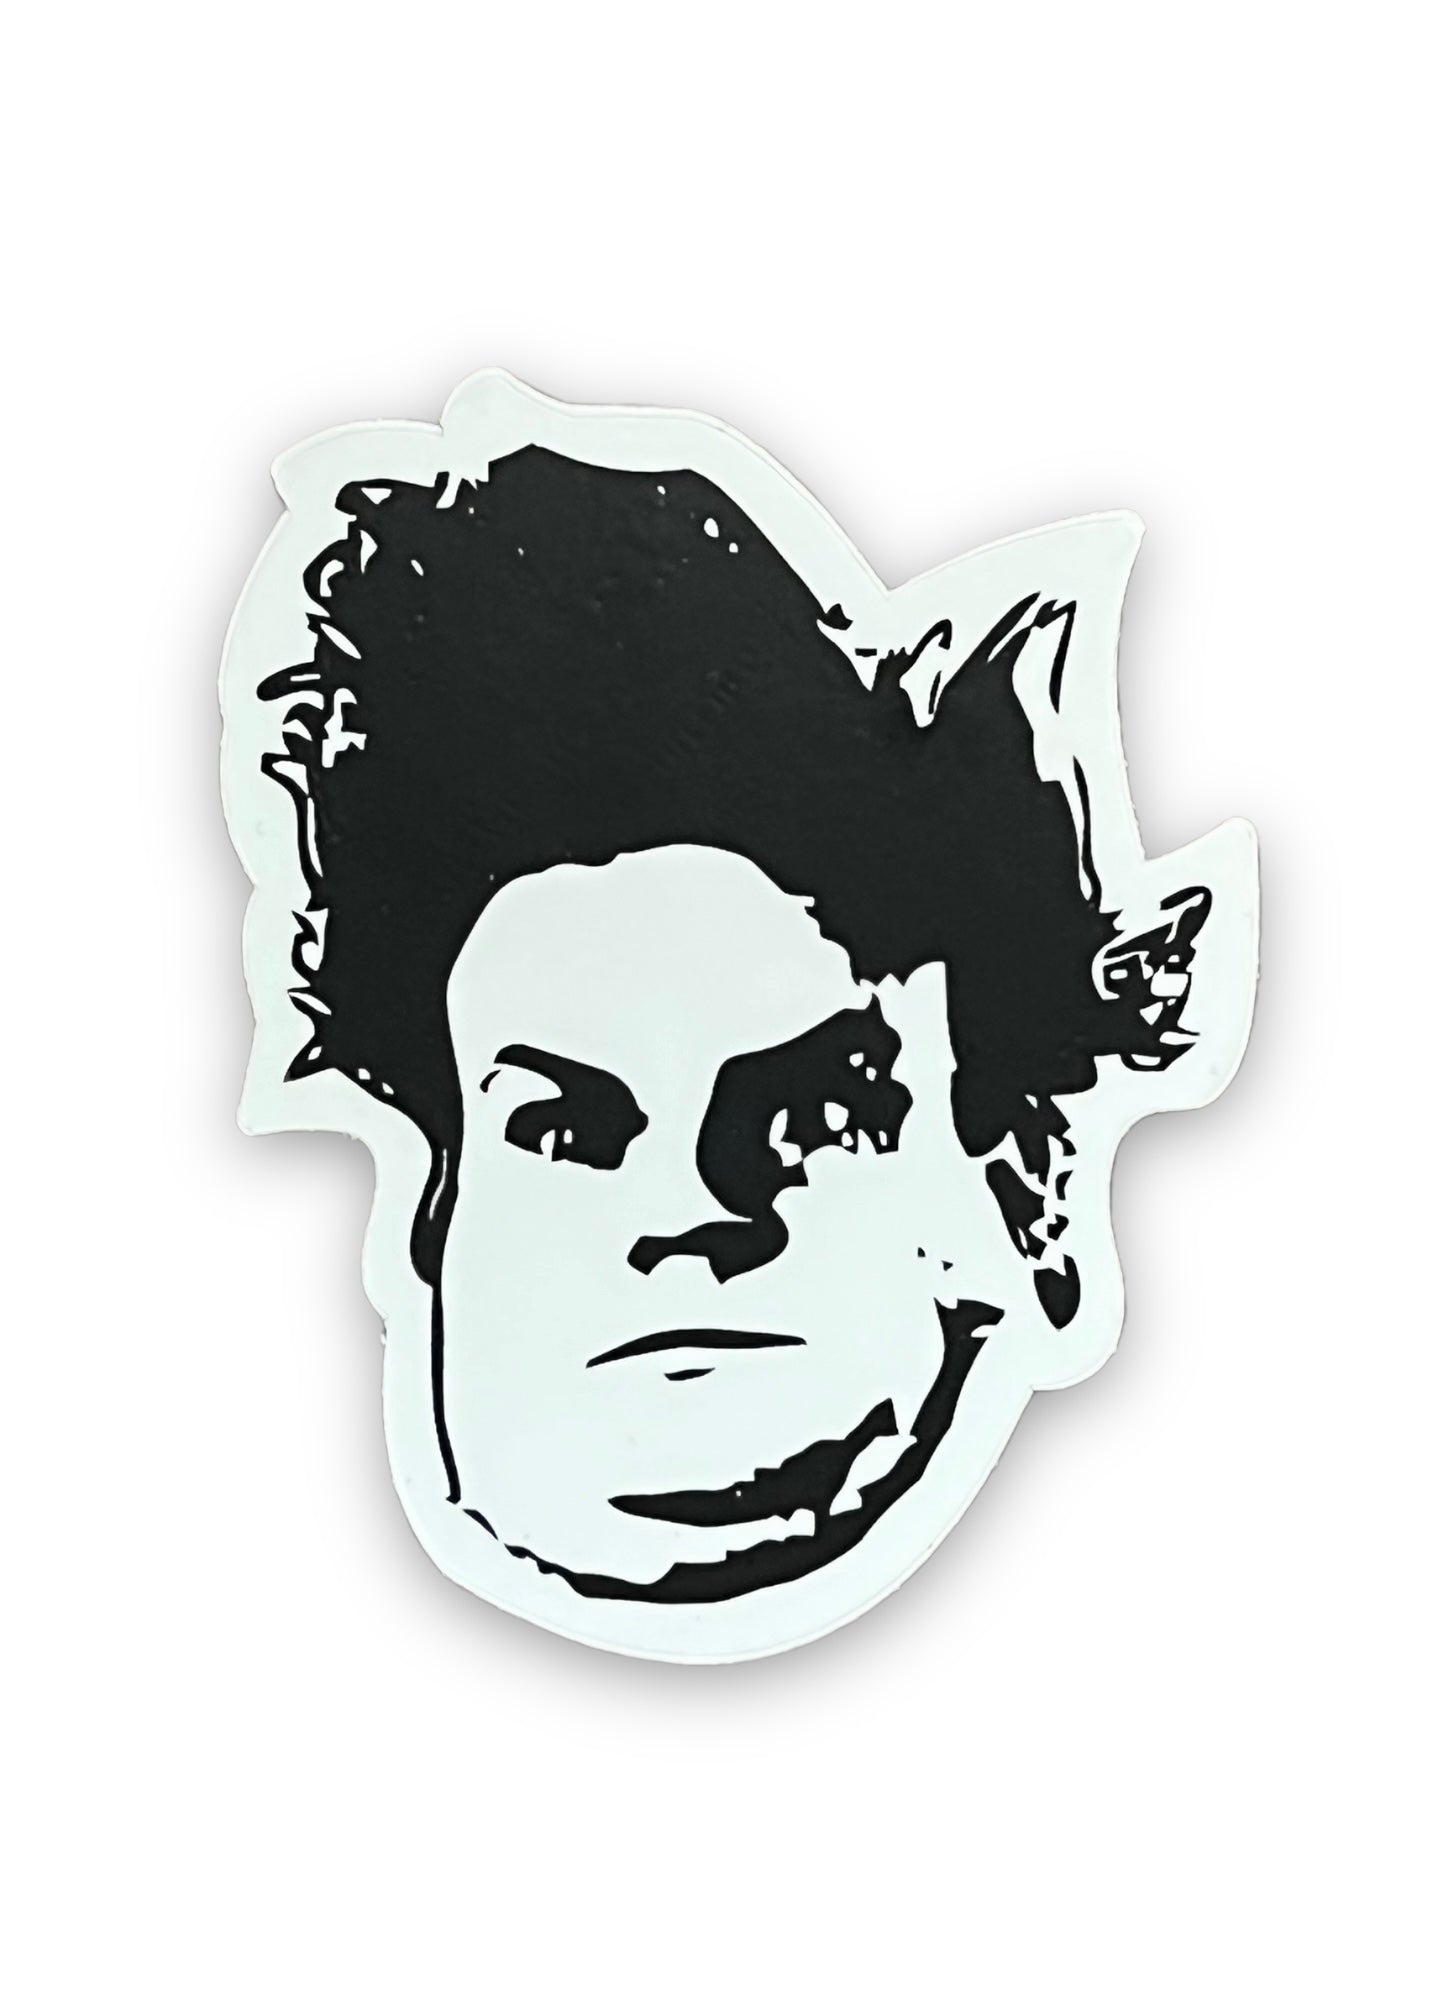 Chris Farley, Tommy Boy, waterproof, graphic sticker, by lettercraft Sold at Le Monkey House